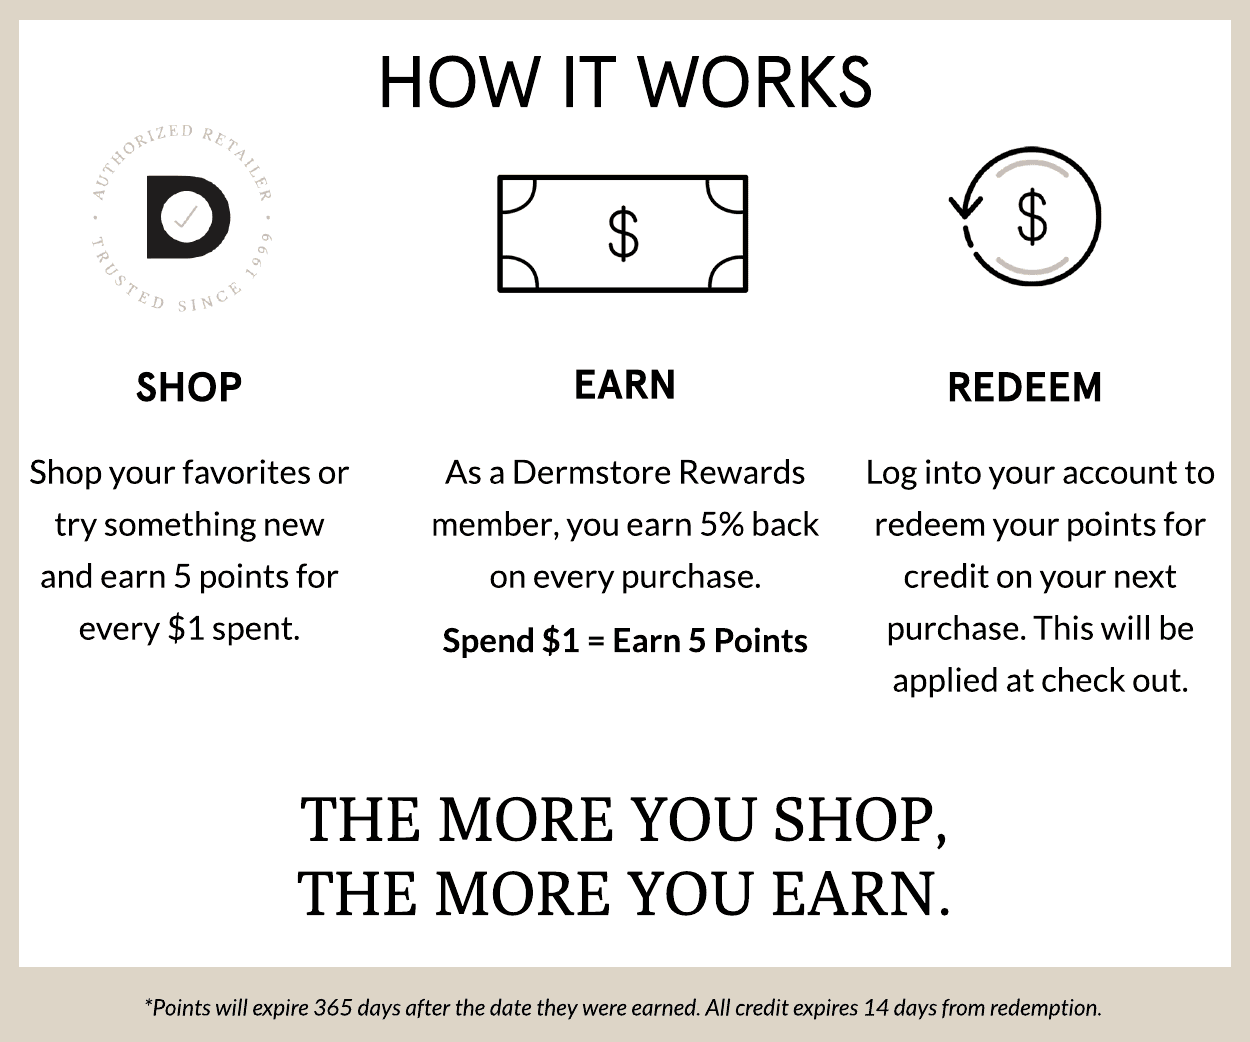 How it works